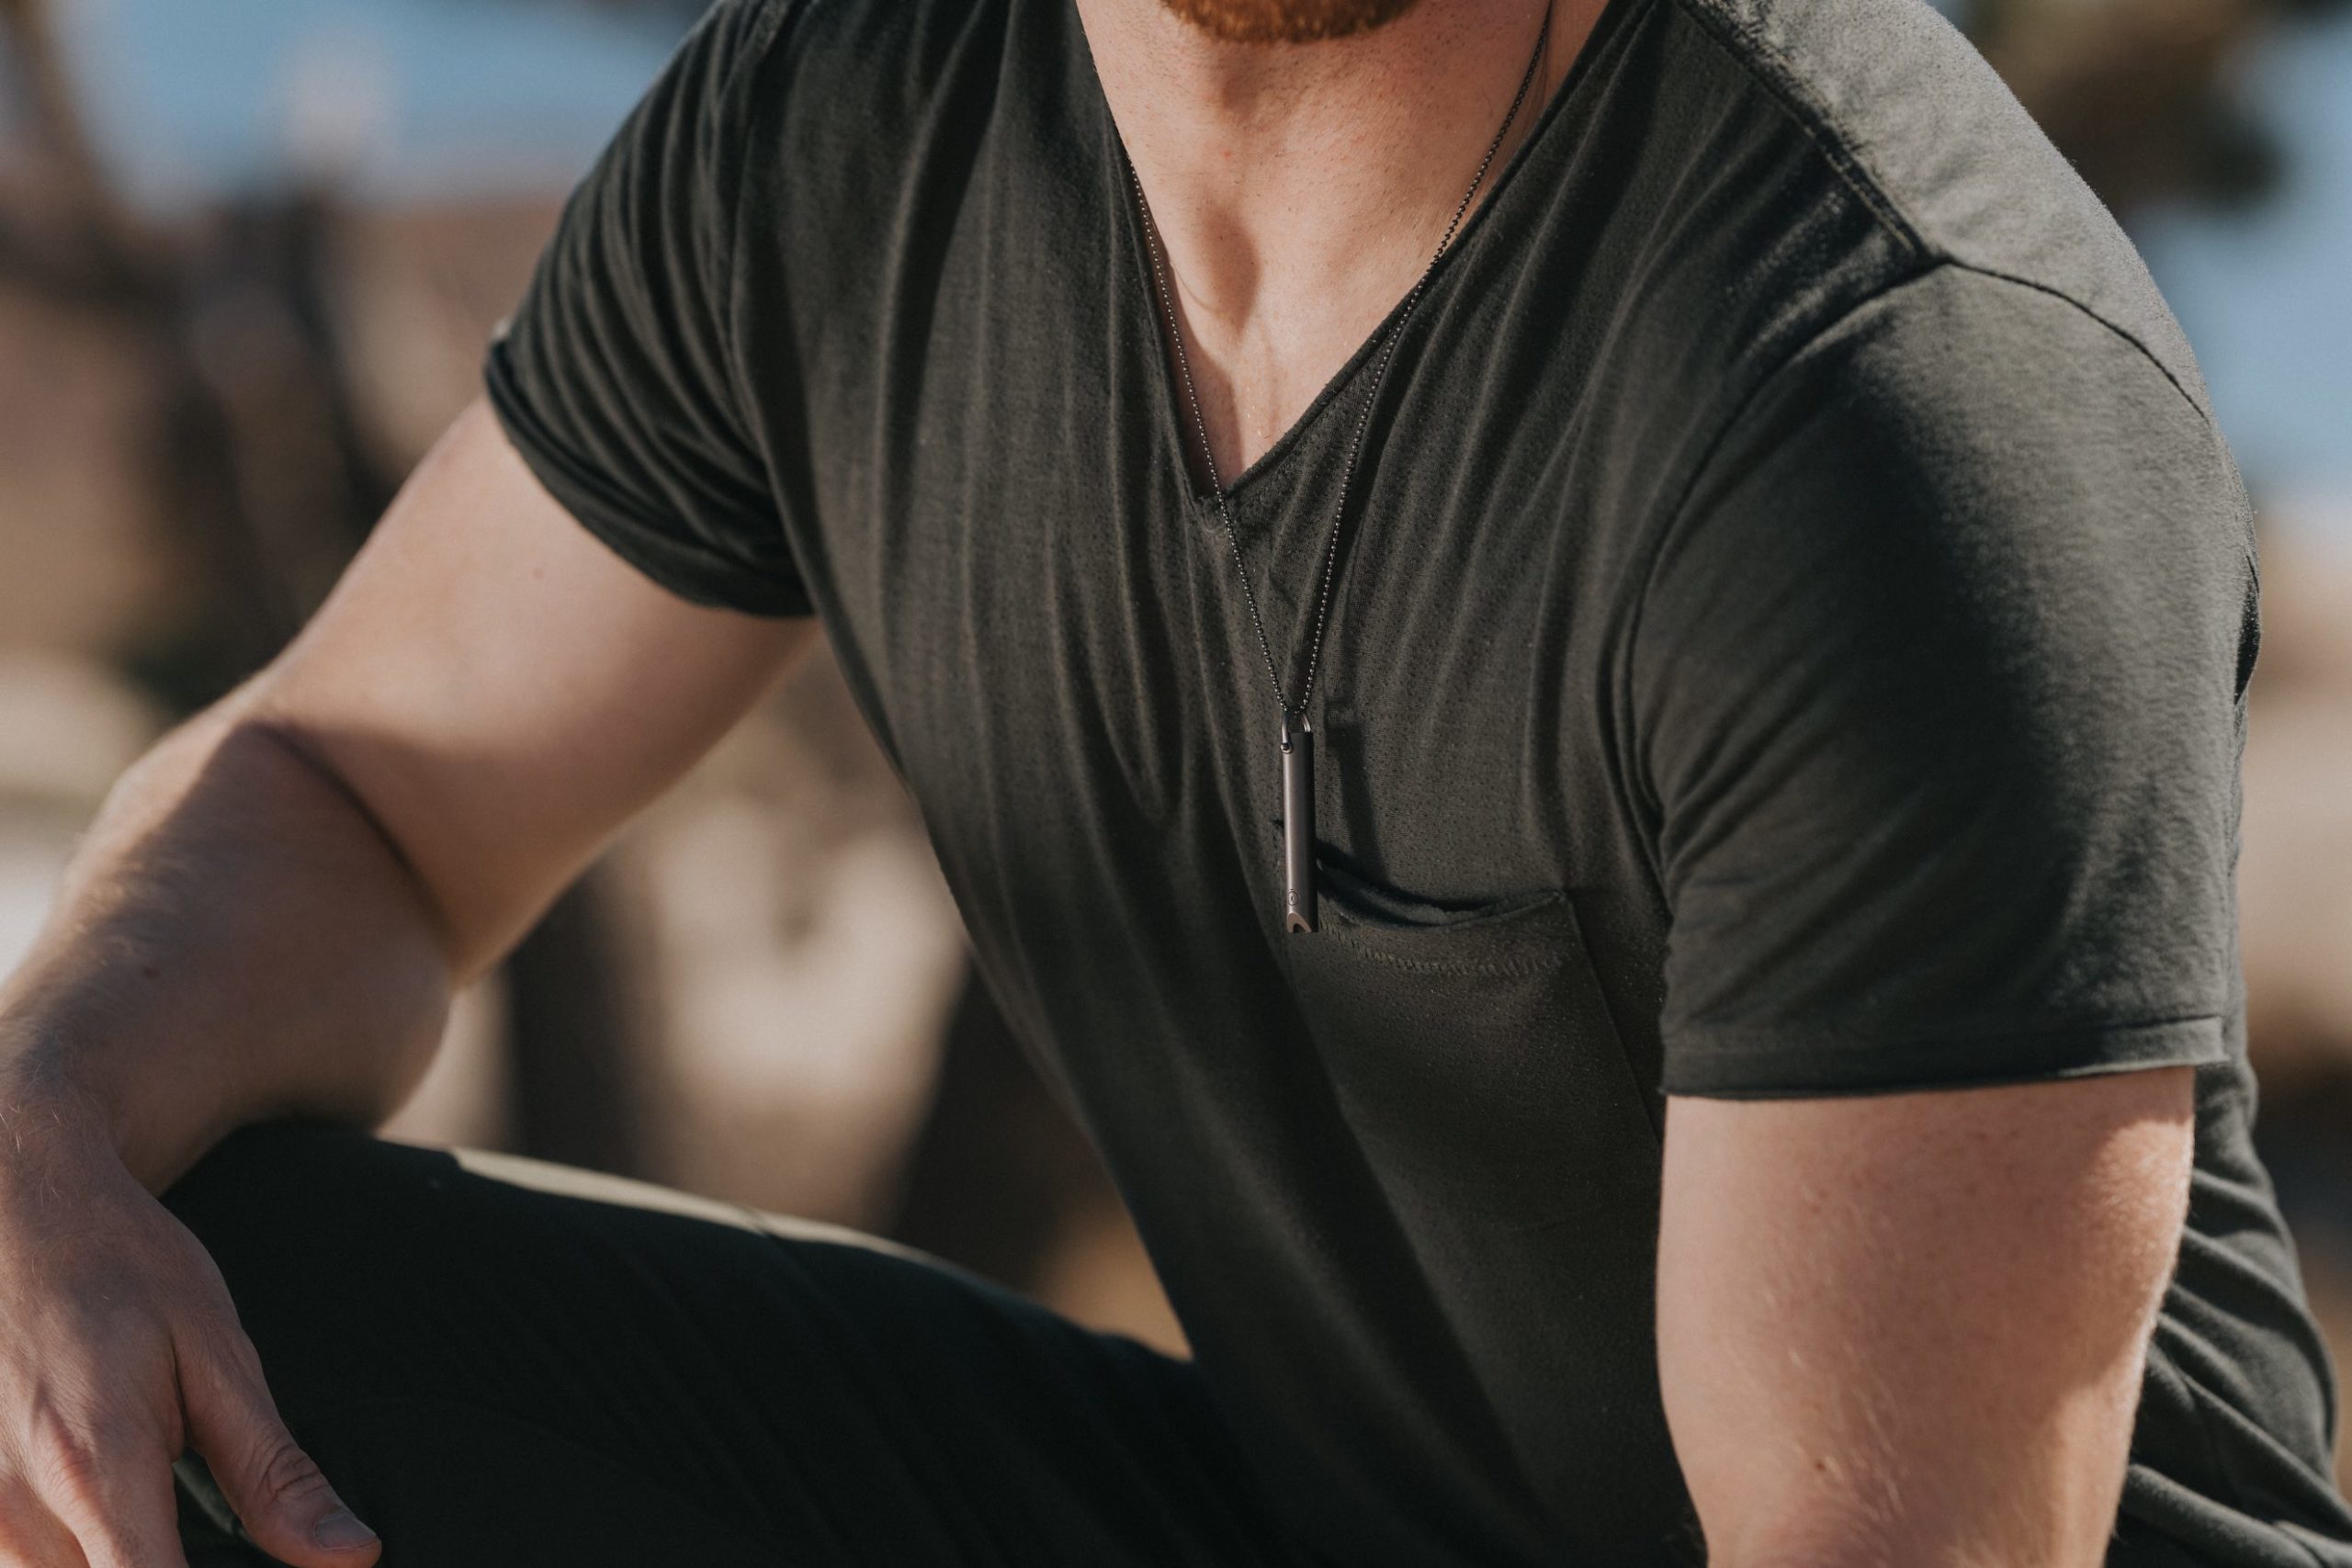 Komuso Design Photography Closeup of a muscular man wearing a black t shirt wearing a silver colored whistle around his neck